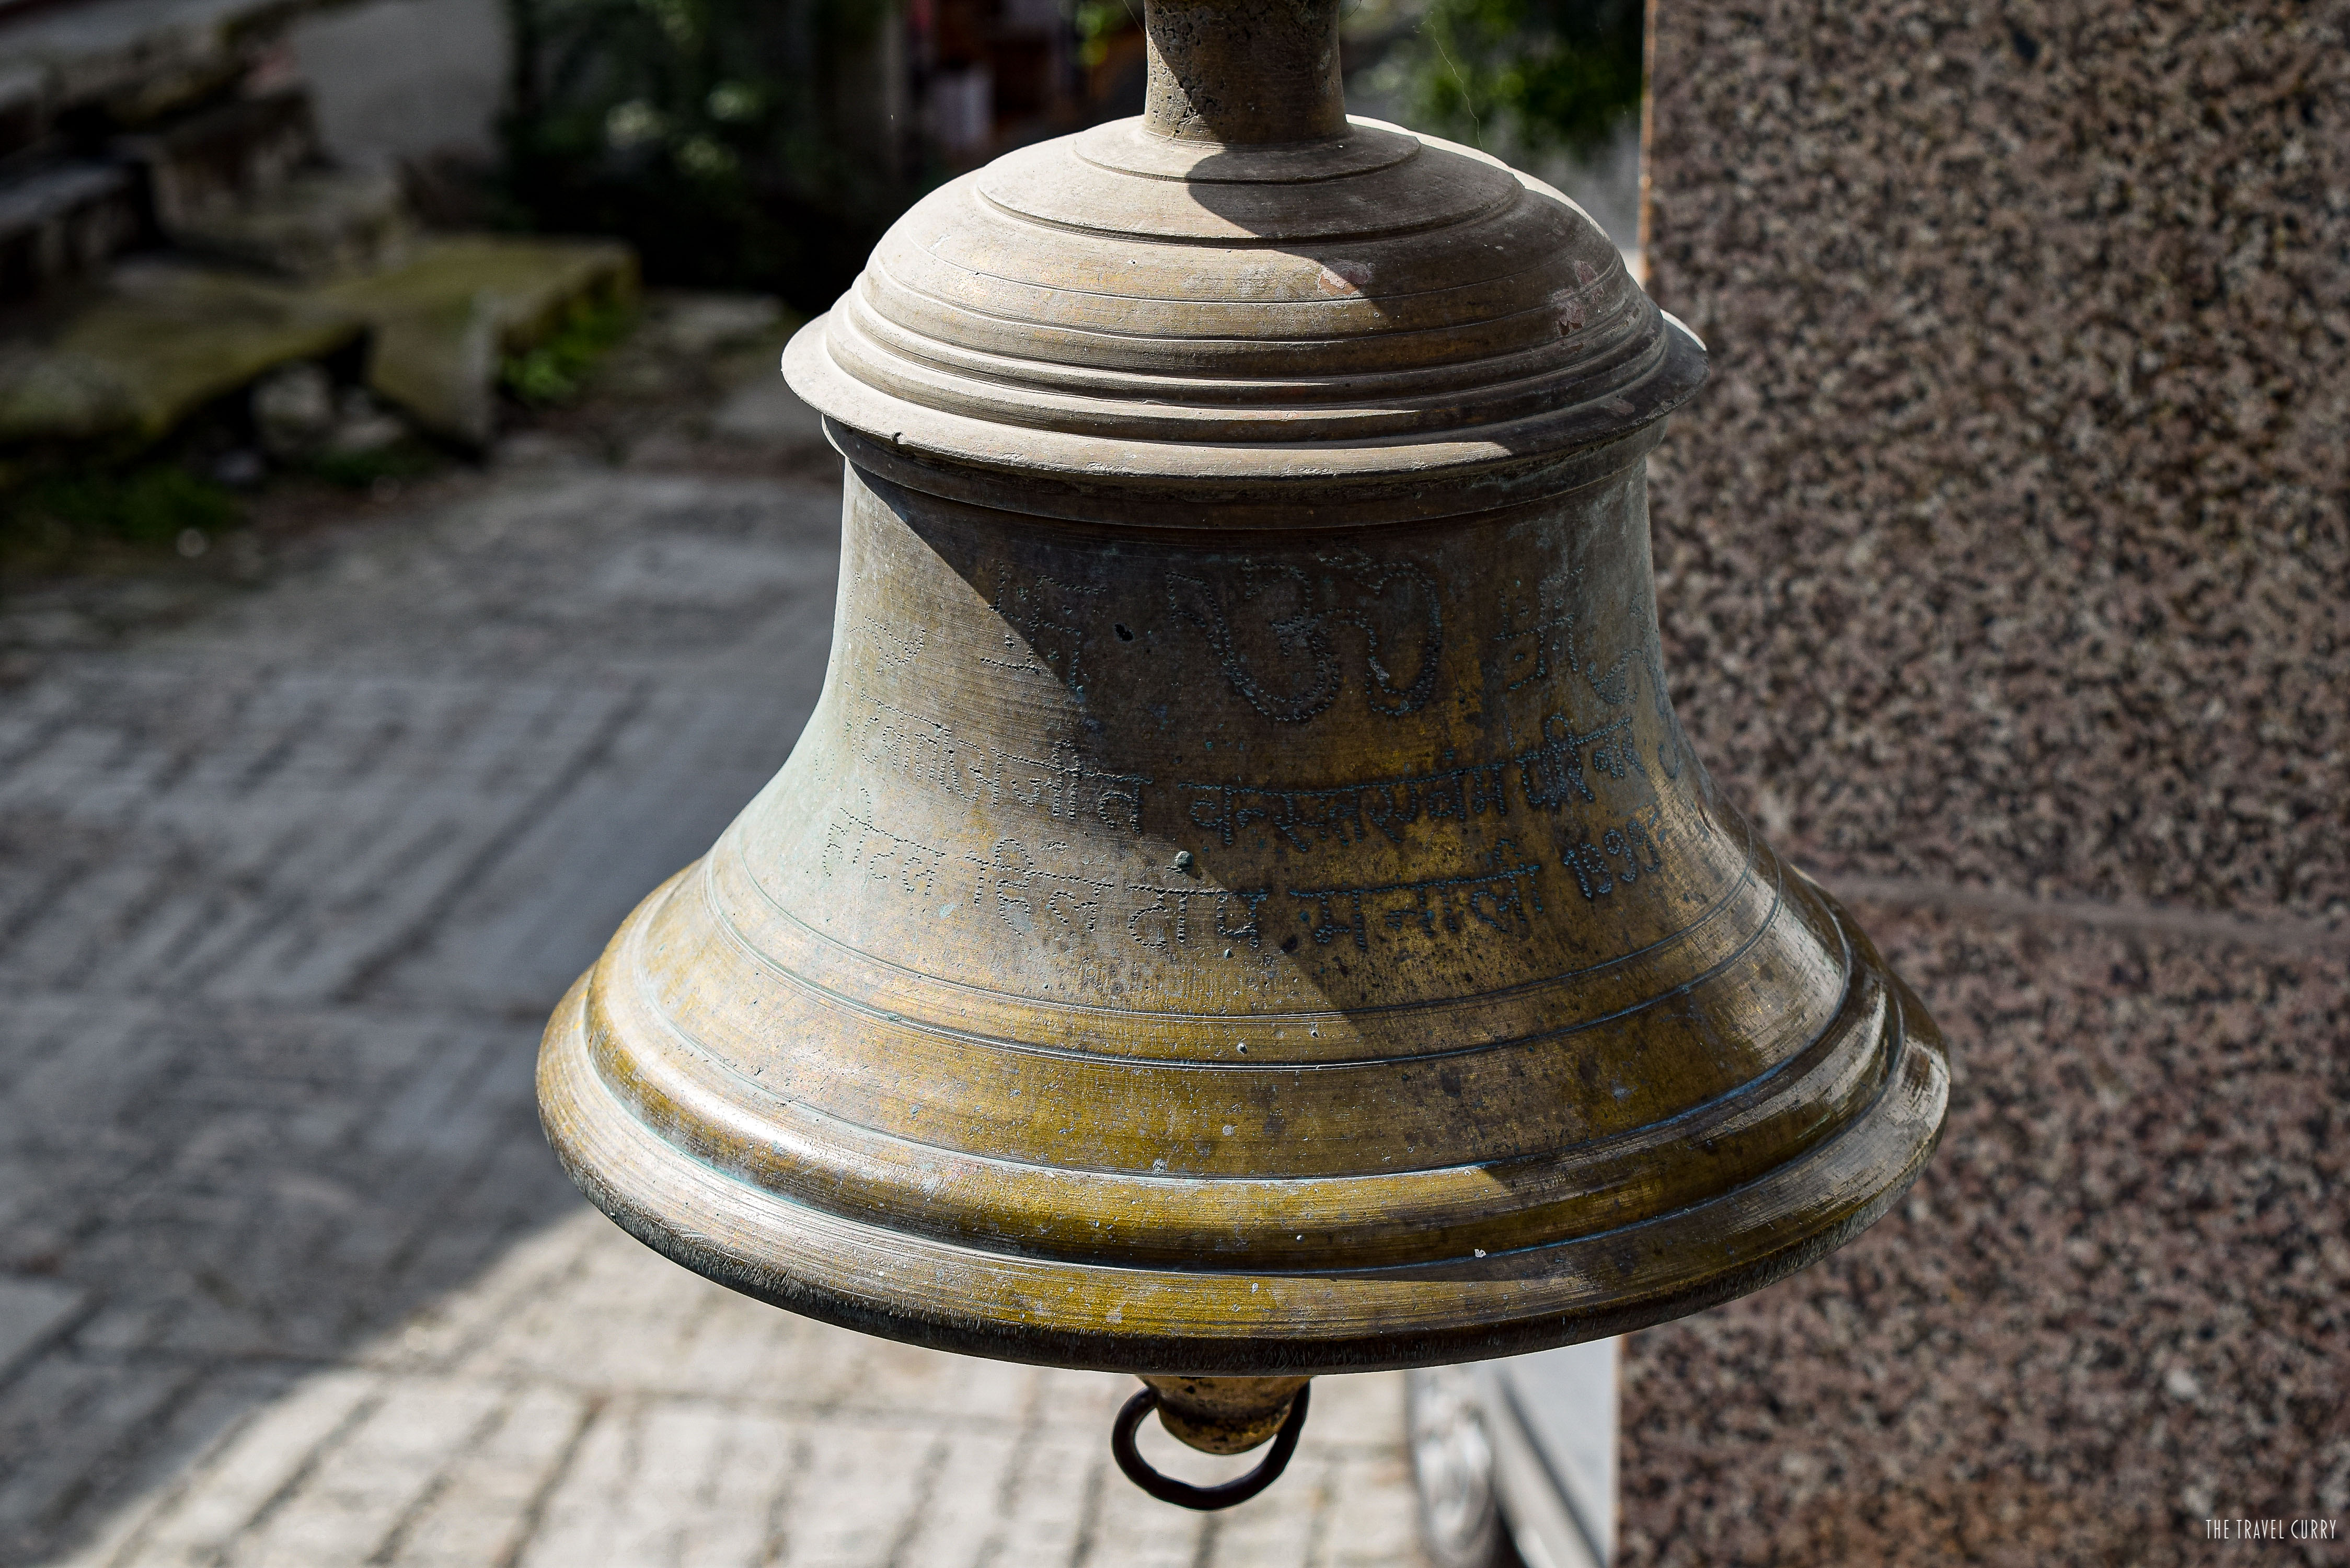 The rustic bell at Manu Temple